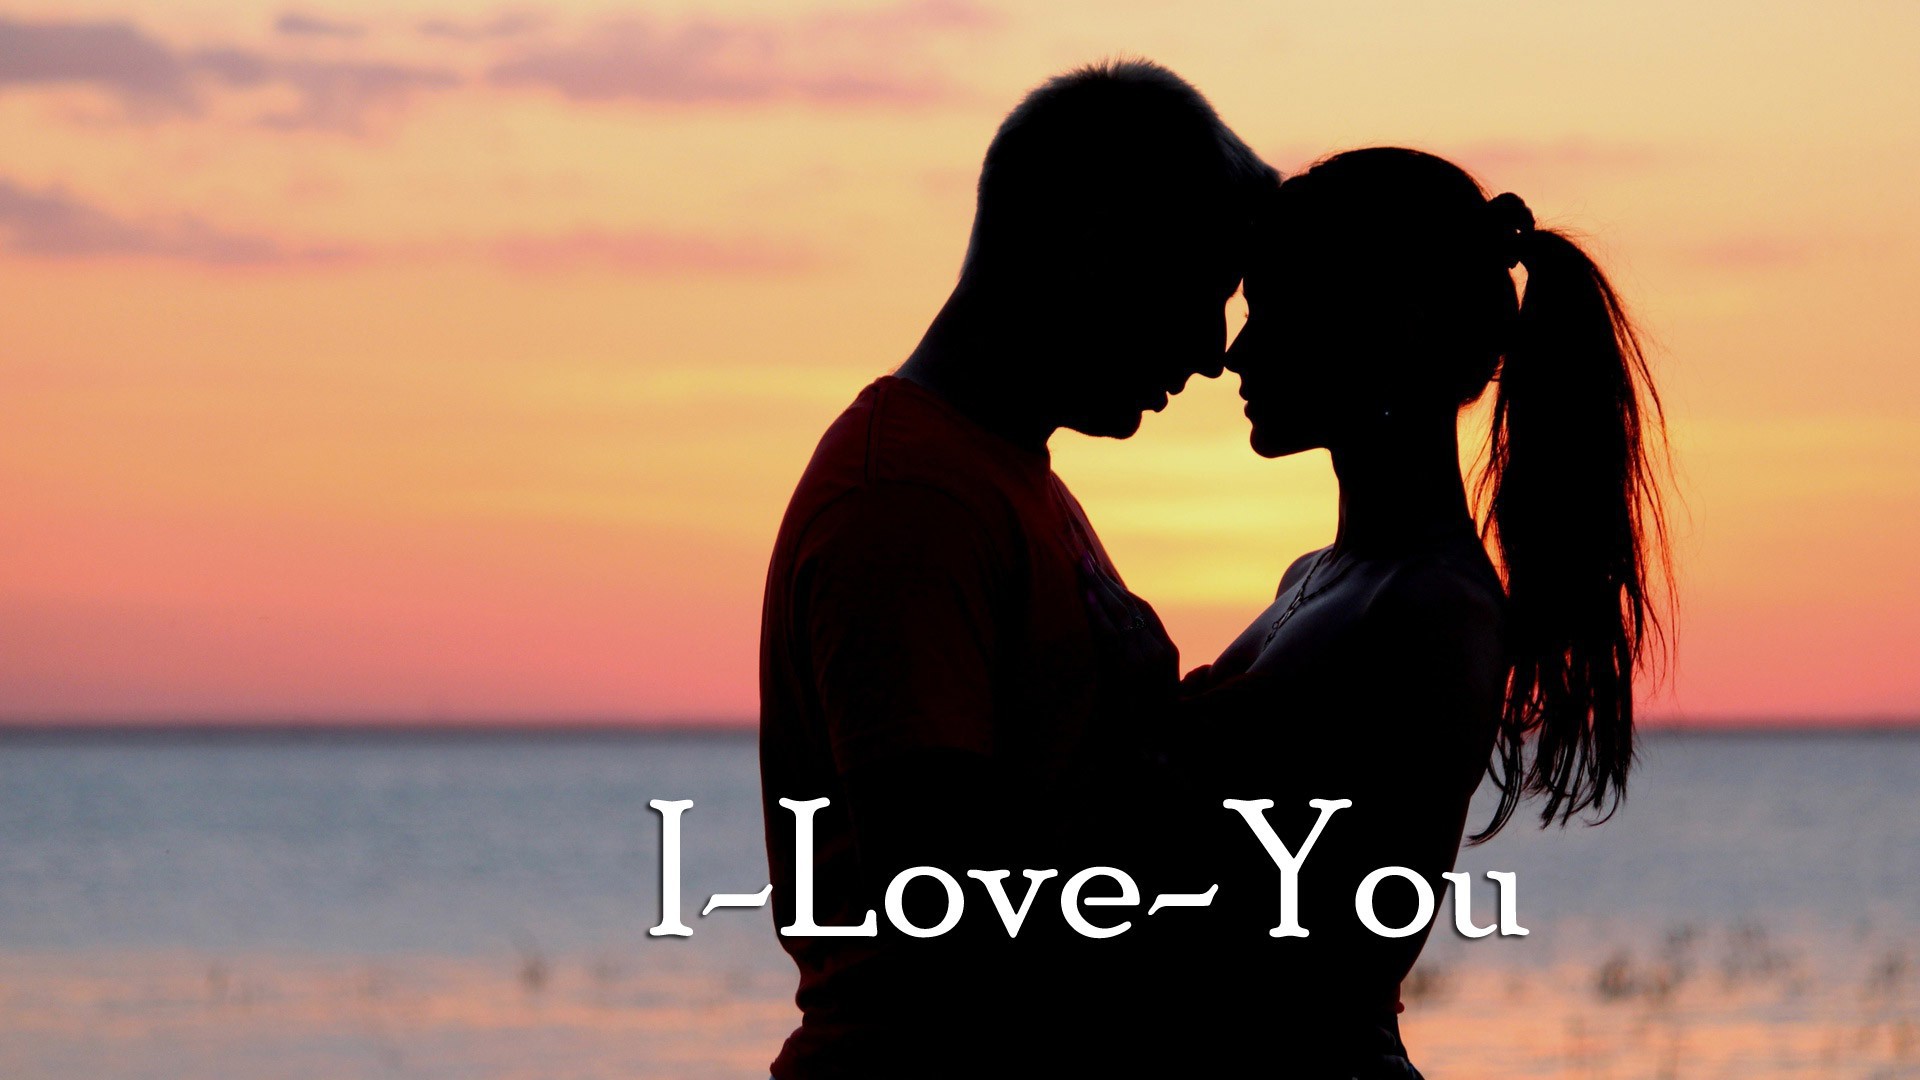 I Love You Hot Couple Free Awesome Image For Mobile